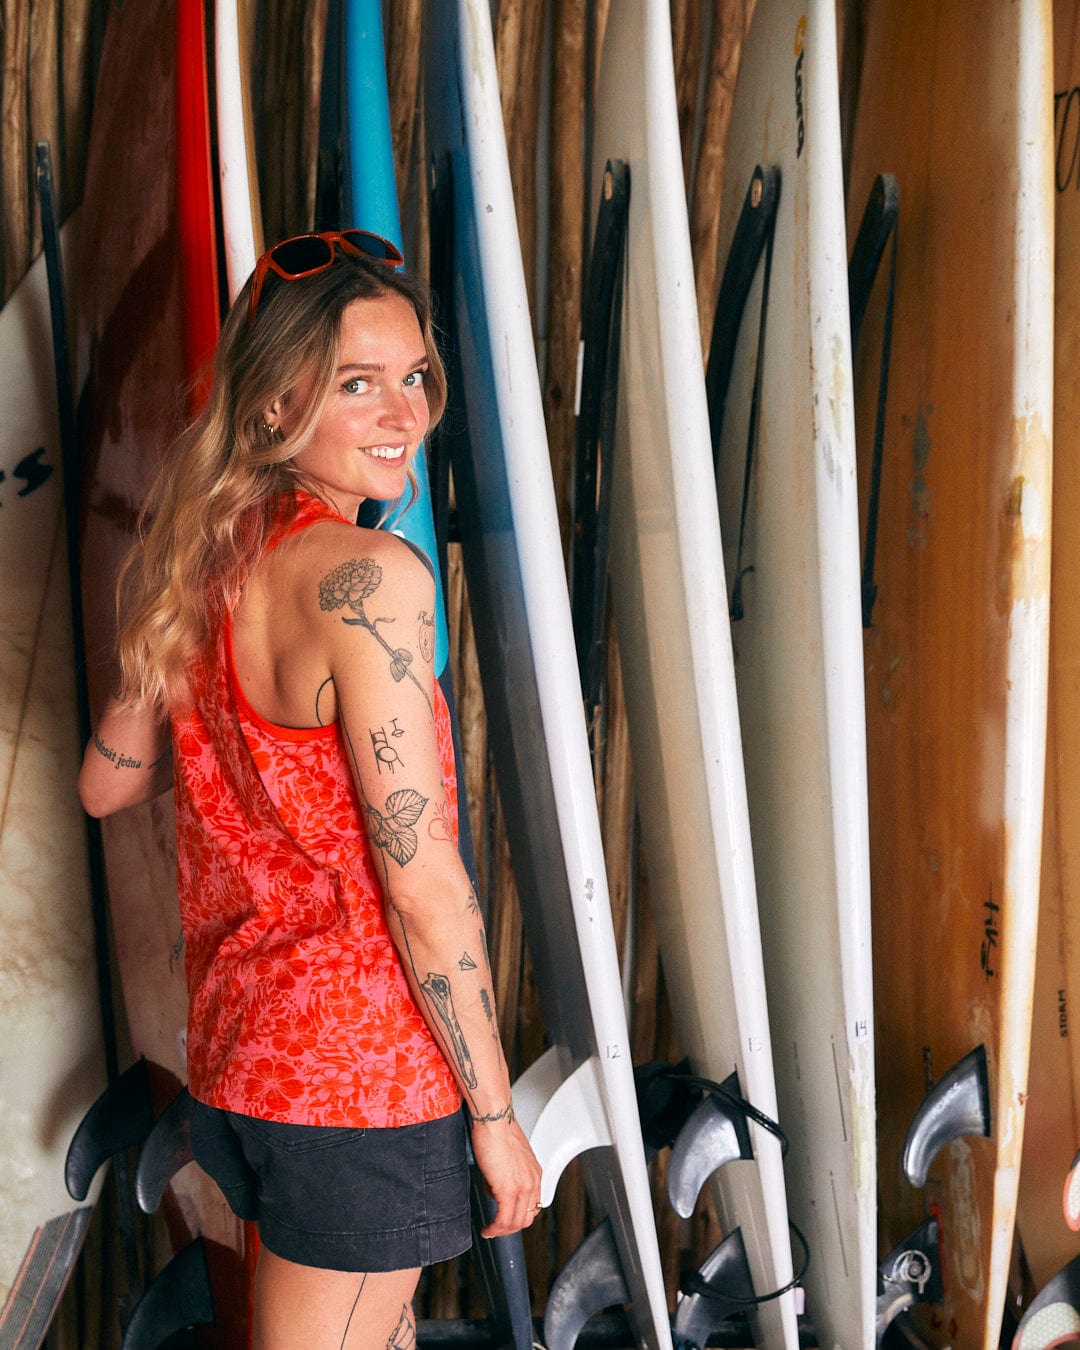 A person with tattoos, wearing a Saltrock Hibiscus - Womens Vest - Red and hibiscus print shorts made of 100% cotton soft peached fabric, stands in front of a rack of surfboards and smiles while looking back at the camera.